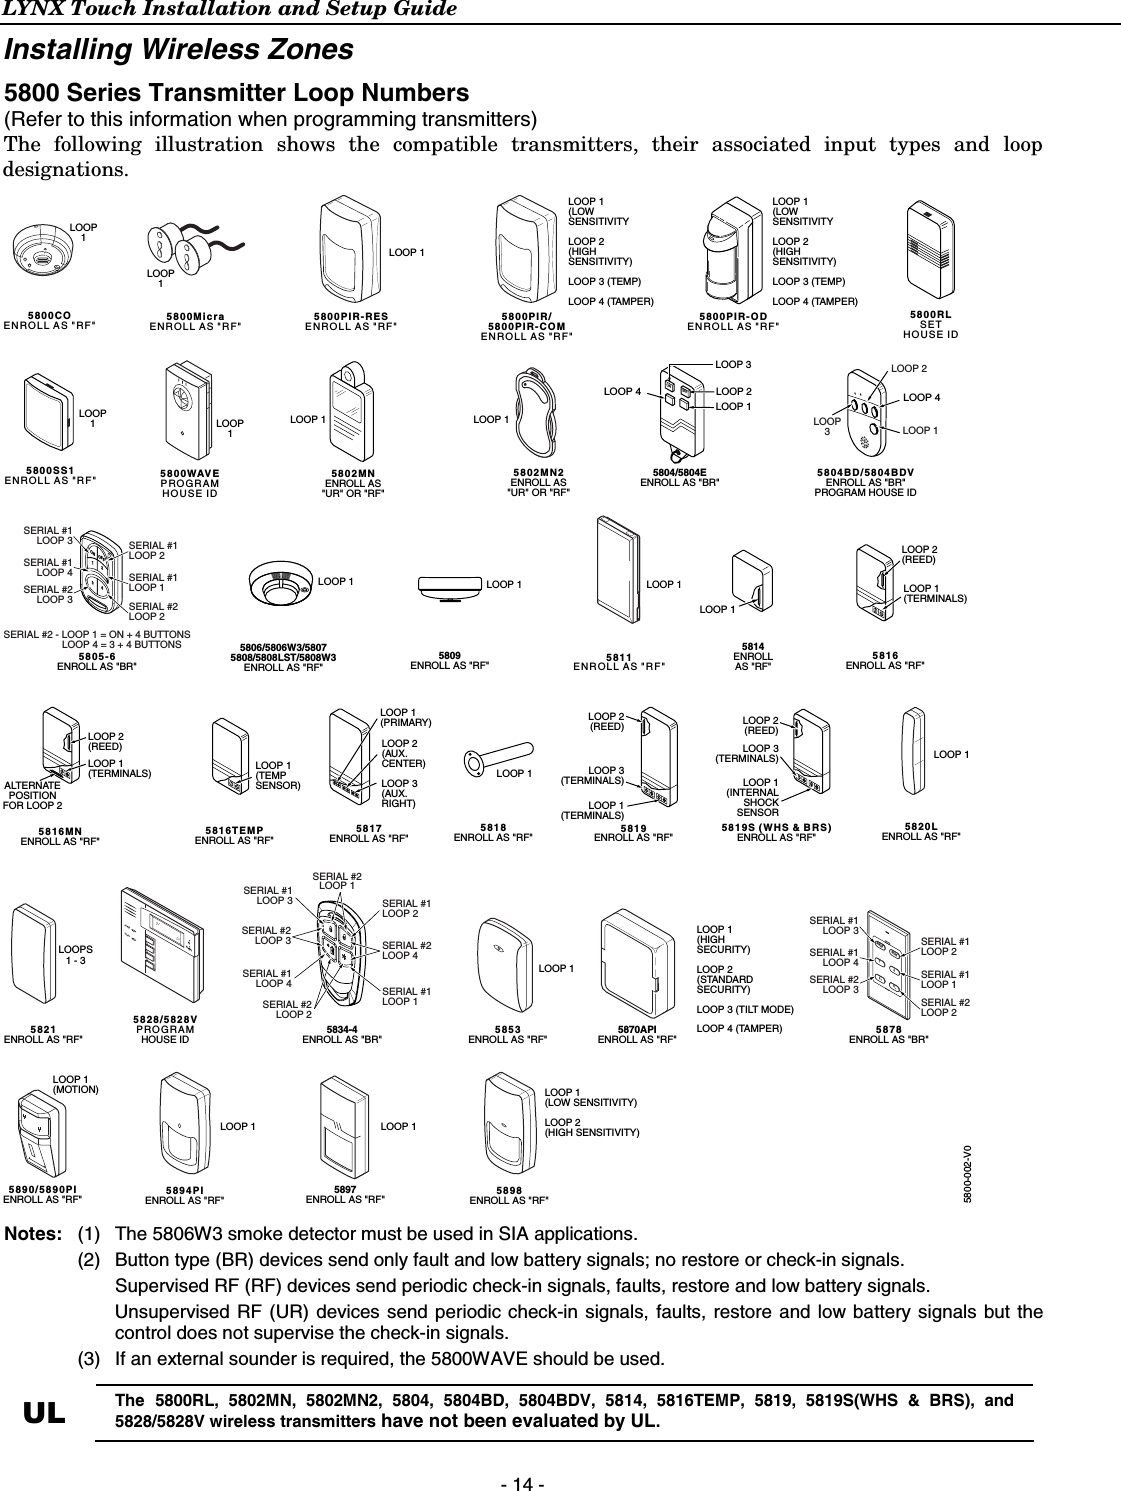 LYNX Touch Installation and Setup Guide  - 14 - Installing Wireless Zones 5800 Series Transmitter Loop Numbers  (Refer to this information when programming transmitters) The following illustration shows the compatible transmitters, their associated input types and loop designations. LOOP 15806/5806W3/58075808/5808LST/5808W3ENROLL AS &quot;RF&quot;LOOP 1LOOP 15809ENROLL AS &quot;RF&quot;5818ENROLL AS &quot;RF&quot;LOOP 1LOOP 1LOOPS1 - 3LOOP 1LOOP 1LOOP 1LOOP 15814ENROLLAS &quot;RF&quot;5800-002-V0LOOP 1(MOTION)5897ENROLL AS &quot;RF&quot;5890/5890PIENROLL AS &quot;RF&quot;LOOP 1LOOP 15802MNENROLL AS&quot;UR&quot; OR &quot;RF&quot;5805-6ENROLL AS &quot;BR&quot;5804BD/5804BDVENROLL AS &quot;BR&quot;PROGRAM HOUSE IDLOOP 4LOOP3LOOP 1LOOP 2•••••••••••••••••••5804/5804EENROLL AS &quot;BR&quot;5816TEMPENROLL AS &quot;RF&quot;LOOP 1(TEMPSENSOR)5817ENROLL AS &quot;RF&quot;LOOP 2(AUX.CENTER)LOOP 1(PRIMARY)LOOP 3(AUX.RIGHT)5816ENROLL AS &quot;RF&quot;LOOP 1(TERMINALS)LOOP 2(REED)5816MNENROLL AS &quot;RF&quot;LOOP 1(TERMINALS)ALTERNATEPOSITIONFOR LOOP 2LOOP 2(REED) LOOP 3(TERMINALS)5828/5828VPROGRAMHOUSE ID5821ENROLL AS &quot;RF&quot;5820LENROLL AS &quot;RF&quot;5819S (WHS &amp; BRS)ENROLL AS &quot;RF&quot;LOOP 1(INTERNALSHOCKSENSORLOOP 2(REED)5819ENROLL AS &quot;RF&quot;LOOP 2(REED)LOOP 3(TERMINALS)LOOP 1(TERMINALS)5800WAVEPROGRAMHOUSE ID5800PIR-ODENROLL AS &quot;RF&quot;5800PIR/5800PIR-COMENROLL AS &quot;RF&quot;5811ENROLL AS &quot;RF&quot;5800PIR-RESENROLL AS &quot;RF&quot;5800MicraENROLL AS &quot;RF&quot;5800COENROLL AS &quot;RF&quot;5800SS1ENROLL AS &quot;RF&quot;5800RLSETHOUSE IDLOOP 1LOOP 1(LOWSENSITIVITYLOOP 2(HIGHSENSITIVITY)LOOP 3 (TEMP)LOOP 4 (TAMPER)LOOP 1(HIGHSECURITY)LOOP 2(STANDARDSECURITY)LOOP 3 (TILT MODE)LOOP 4 (TAMPER)LOOP 1(LOWSENSITIVITYLOOP 2(HIGHSENSITIVITY)LOOP 3 (TEMP)LOOP 4 (TAMPER)5834-4ENROLL AS &quot;BR&quot;5894PIENROLL AS &quot;RF&quot;5802MN2ENROLL AS&quot;UR&quot; OR &quot;RF&quot;LOOP1LOOP1LOOP1LOOP15878ENROLL AS &quot;BR&quot;5870APIENROLL AS &quot;RF&quot;5853ENROLL AS &quot;RF&quot;ARMEDREADYLOOP 1(LOW SENSITIVITY)LOOP 2(HIGH SENSITIVITY)5898ENROLL AS &quot;RF&quot;LOOP 4LOOP 1LOOP 2LOOP 3SERIAL #1LOOP 3SERIAL #1LOOP 4SERIAL #2LOOP 3SERIAL #1LOOP 2SERIAL #1LOOP 1SERIAL #2LOOP 23AWAY STAY124OFFON4321OFFONSERIAL #1LOOP 3SERIAL #1LOOP 4SERIAL #2LOOP 1SERIAL #2LOOP 2SERIAL #2LOOP 3SERIAL #1LOOP 2SERIAL #1LOOP 1SERIAL #1LOOP 3SERIAL #1LOOP 4SERIAL #2LOOP 3SERIAL #1LOOP 2SERIAL #1LOOP 1SERIAL #2LOOP 2SERIAL #2 - LOOP 1 = ON + 4 BUTTONSLOOP 4 = 3 + 4 BUTTONSSERIAL #2LOOP 4  Notes:  (1)  The 5806W3 smoke detector must be used in SIA applications.   (2)  Button type (BR) devices send only fault and low battery signals; no restore or check-in signals.     Supervised RF (RF) devices send periodic check-in signals, faults, restore and low battery signals.     Unsupervised RF (UR) devices send periodic check-in signals, faults, restore and low battery signals but the control does not supervise the check-in signals.   (3)   If an external sounder is required, the 5800WAVE should be used.  UL The 5800RL, 5802MN, 5802MN2, 5804, 5804BD, 5804BDV, 5814, 5816TEMP, 5819, 5819S(WHS &amp; BRS), and 5828/5828V wireless transmitters have not been evaluated by UL. 